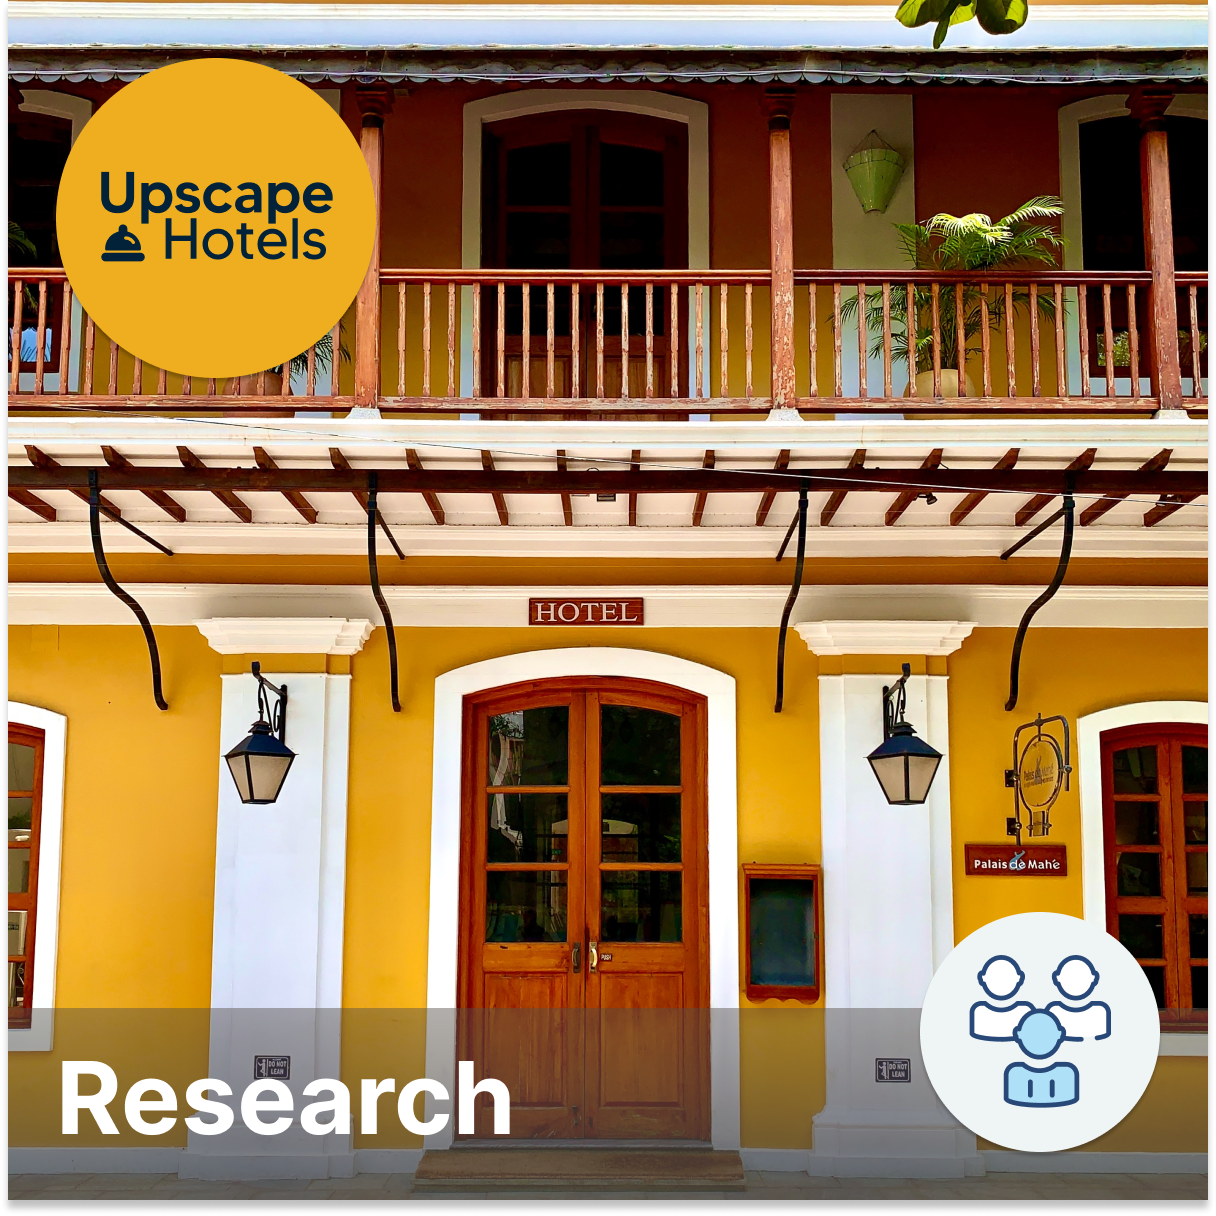 Research Phase: Upscape Hotels